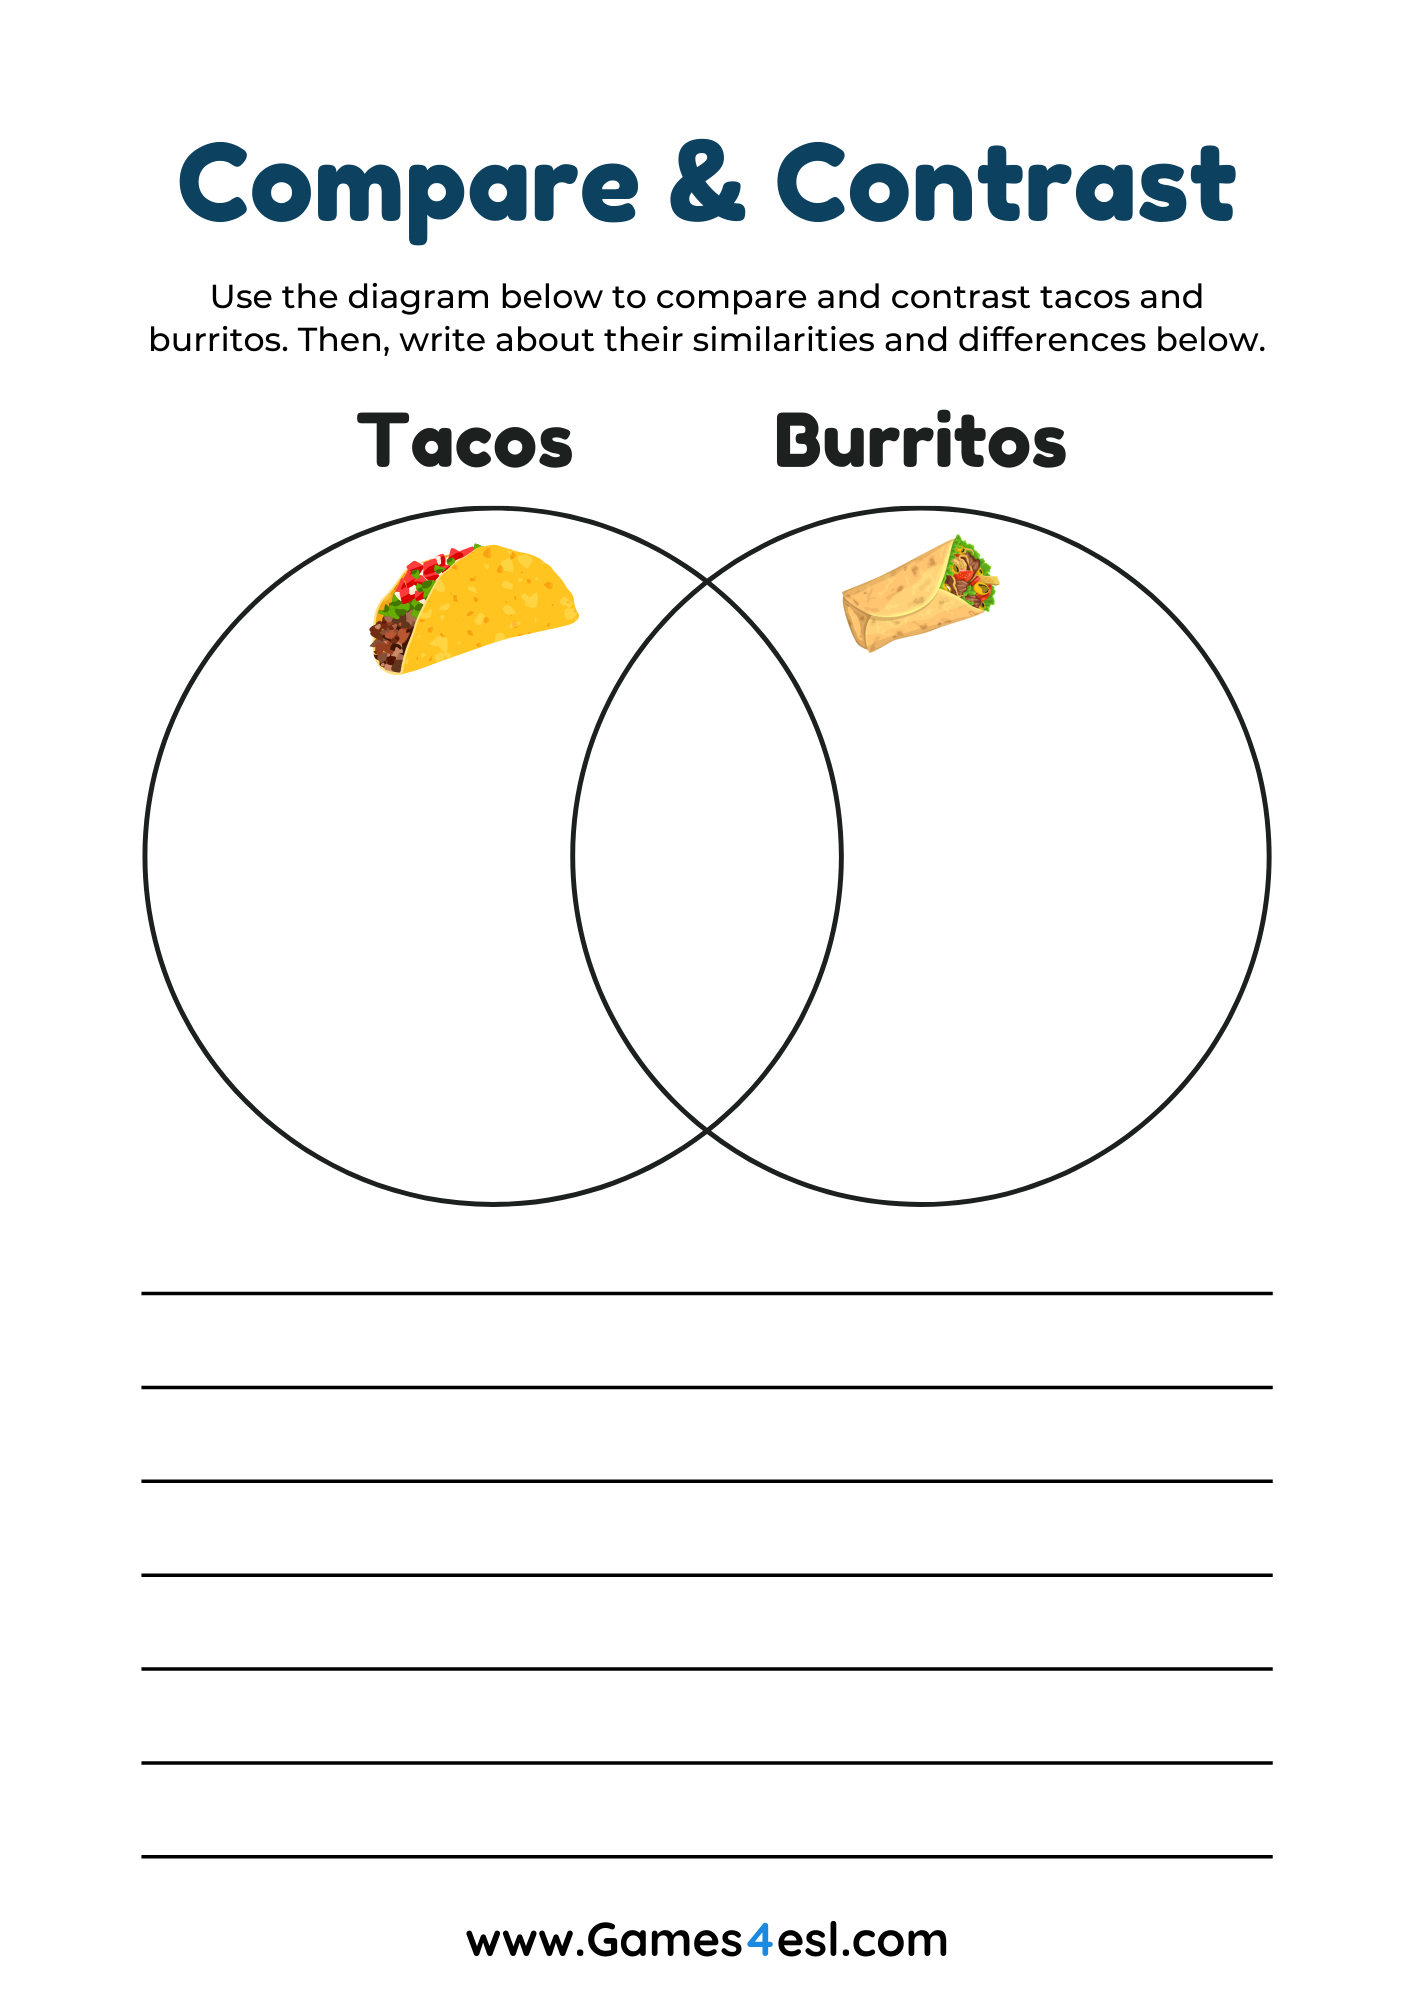 A Compare and Contrast worksheet with a Venn diagram that asks students to compare and contrast tacos and burritos.